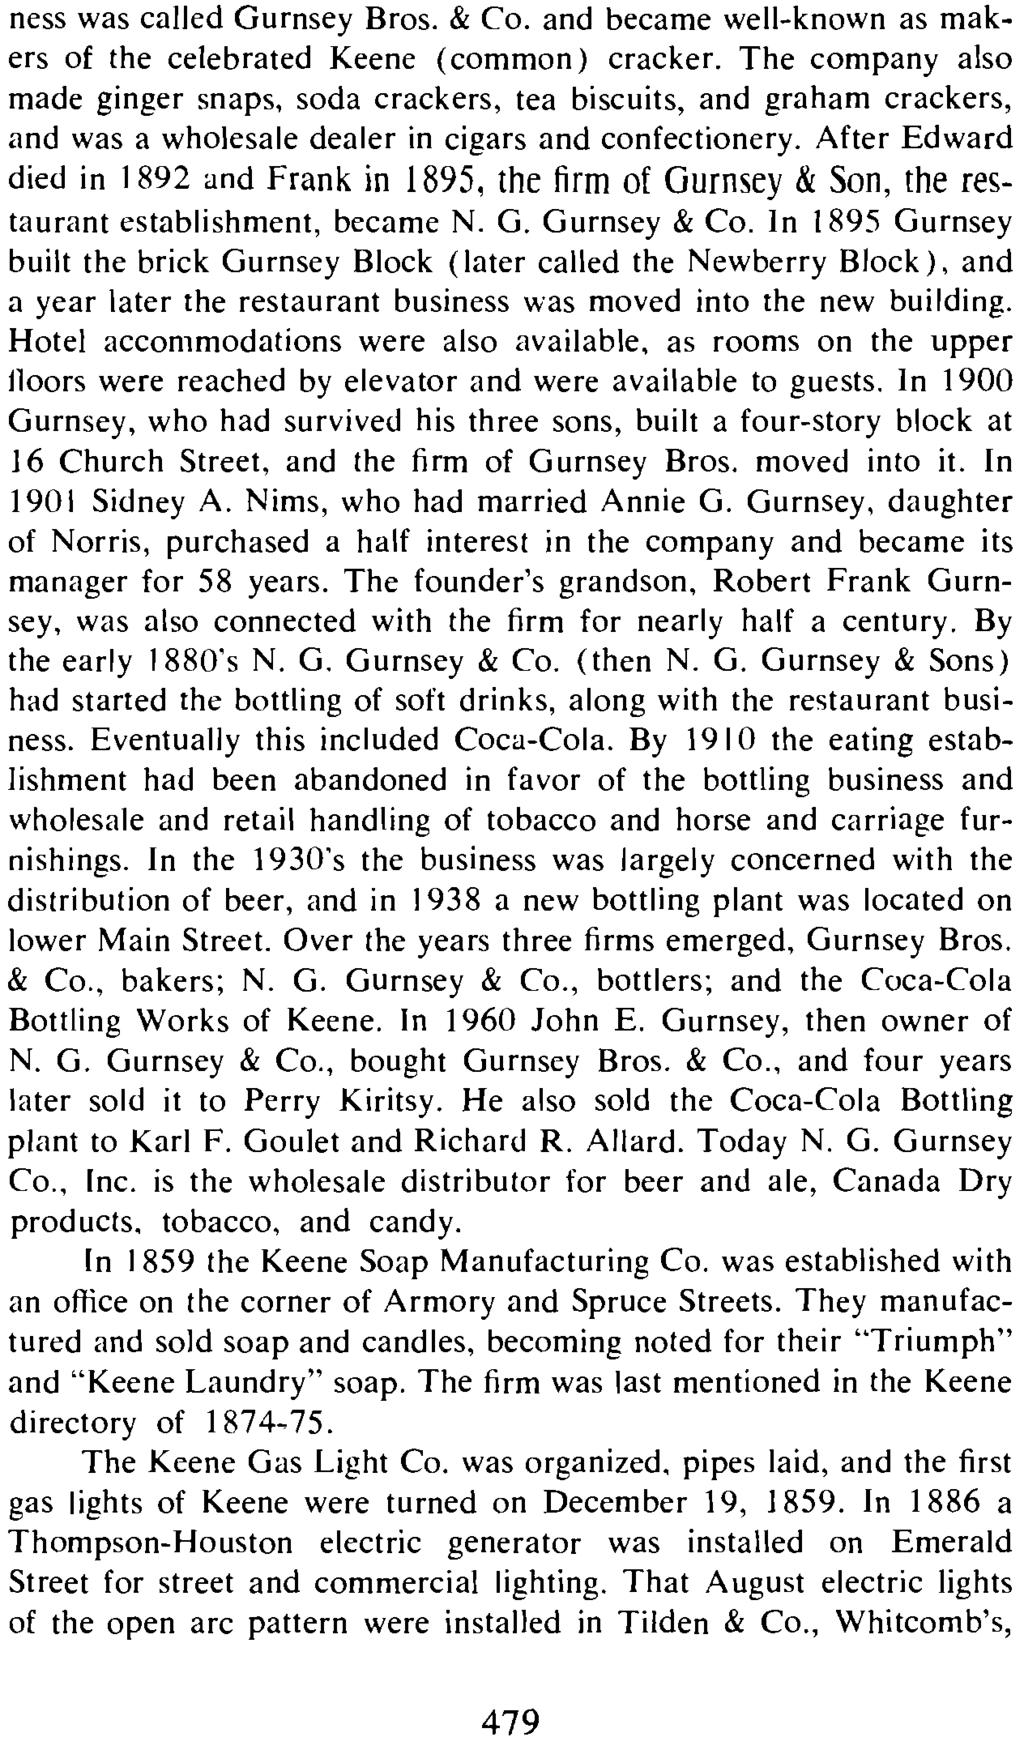 ness was called Gurnsey Bros. & Co. and became well-known as makers of the celebrated Keene (common) cracker.